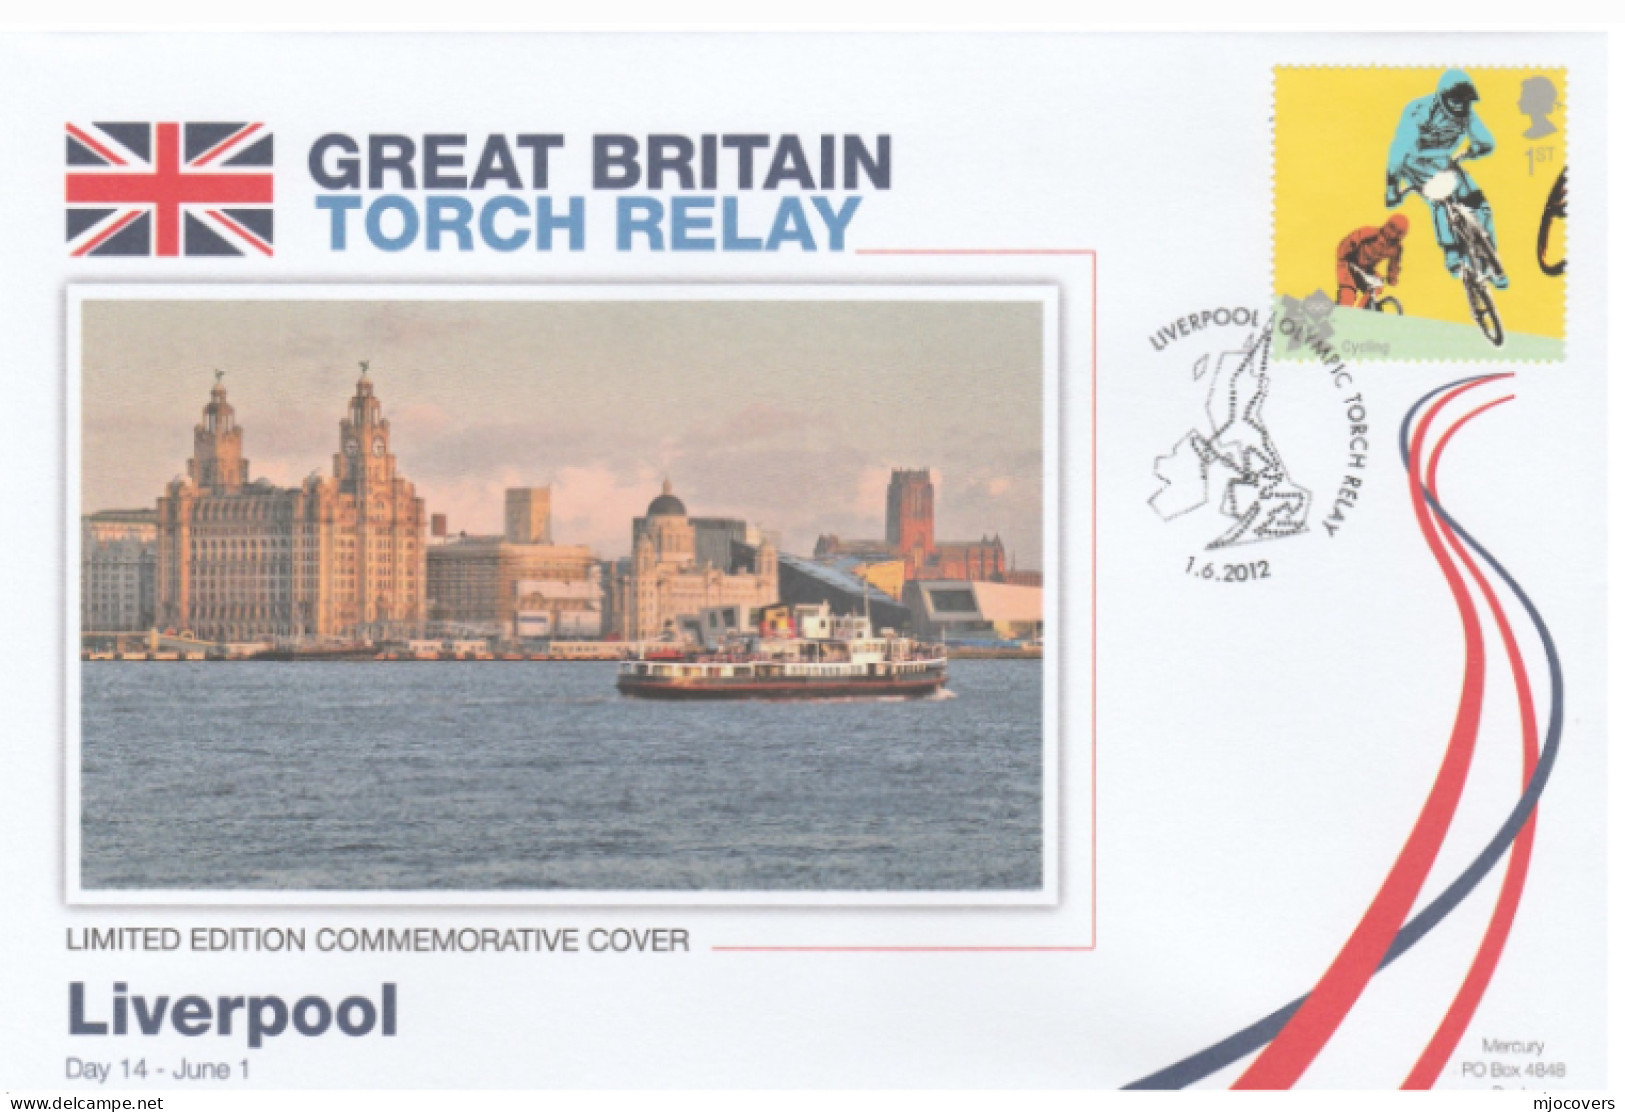 2012 Ltd Edn MERSEY FERRY OLYMPICS TORCH Relay Liverpool COVER London OLYMPIC GAMES Sport BMX Cycling Bicycle  Stamps GB - Zomer 2012: Londen